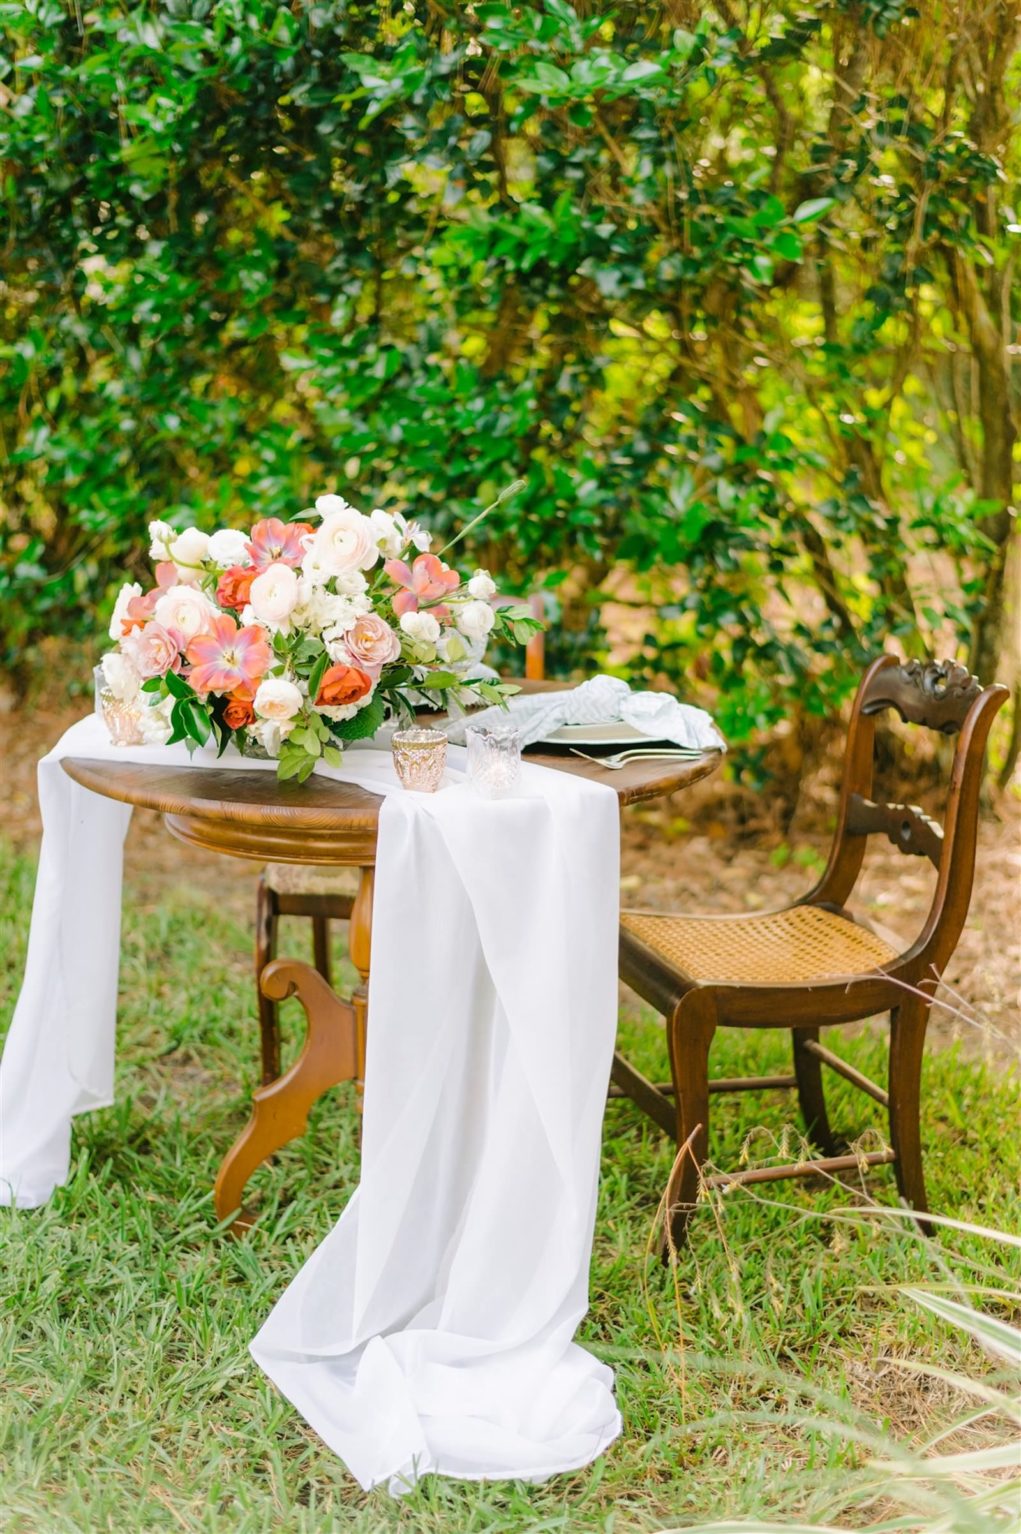 Tampa Bay Private Residence Wedding, Romantic Backyard Intimate Reception with Wooden Antique Household Furniture for Sweetheart Table, Decorated with Lush Bridal Bouquet with Triadic Color Scheme, pink, peach and ivory florals, White Linen Draping | Tampa Bay Wedding Planner, Designer, Florist John Campbell Weddings | Styled Shoot